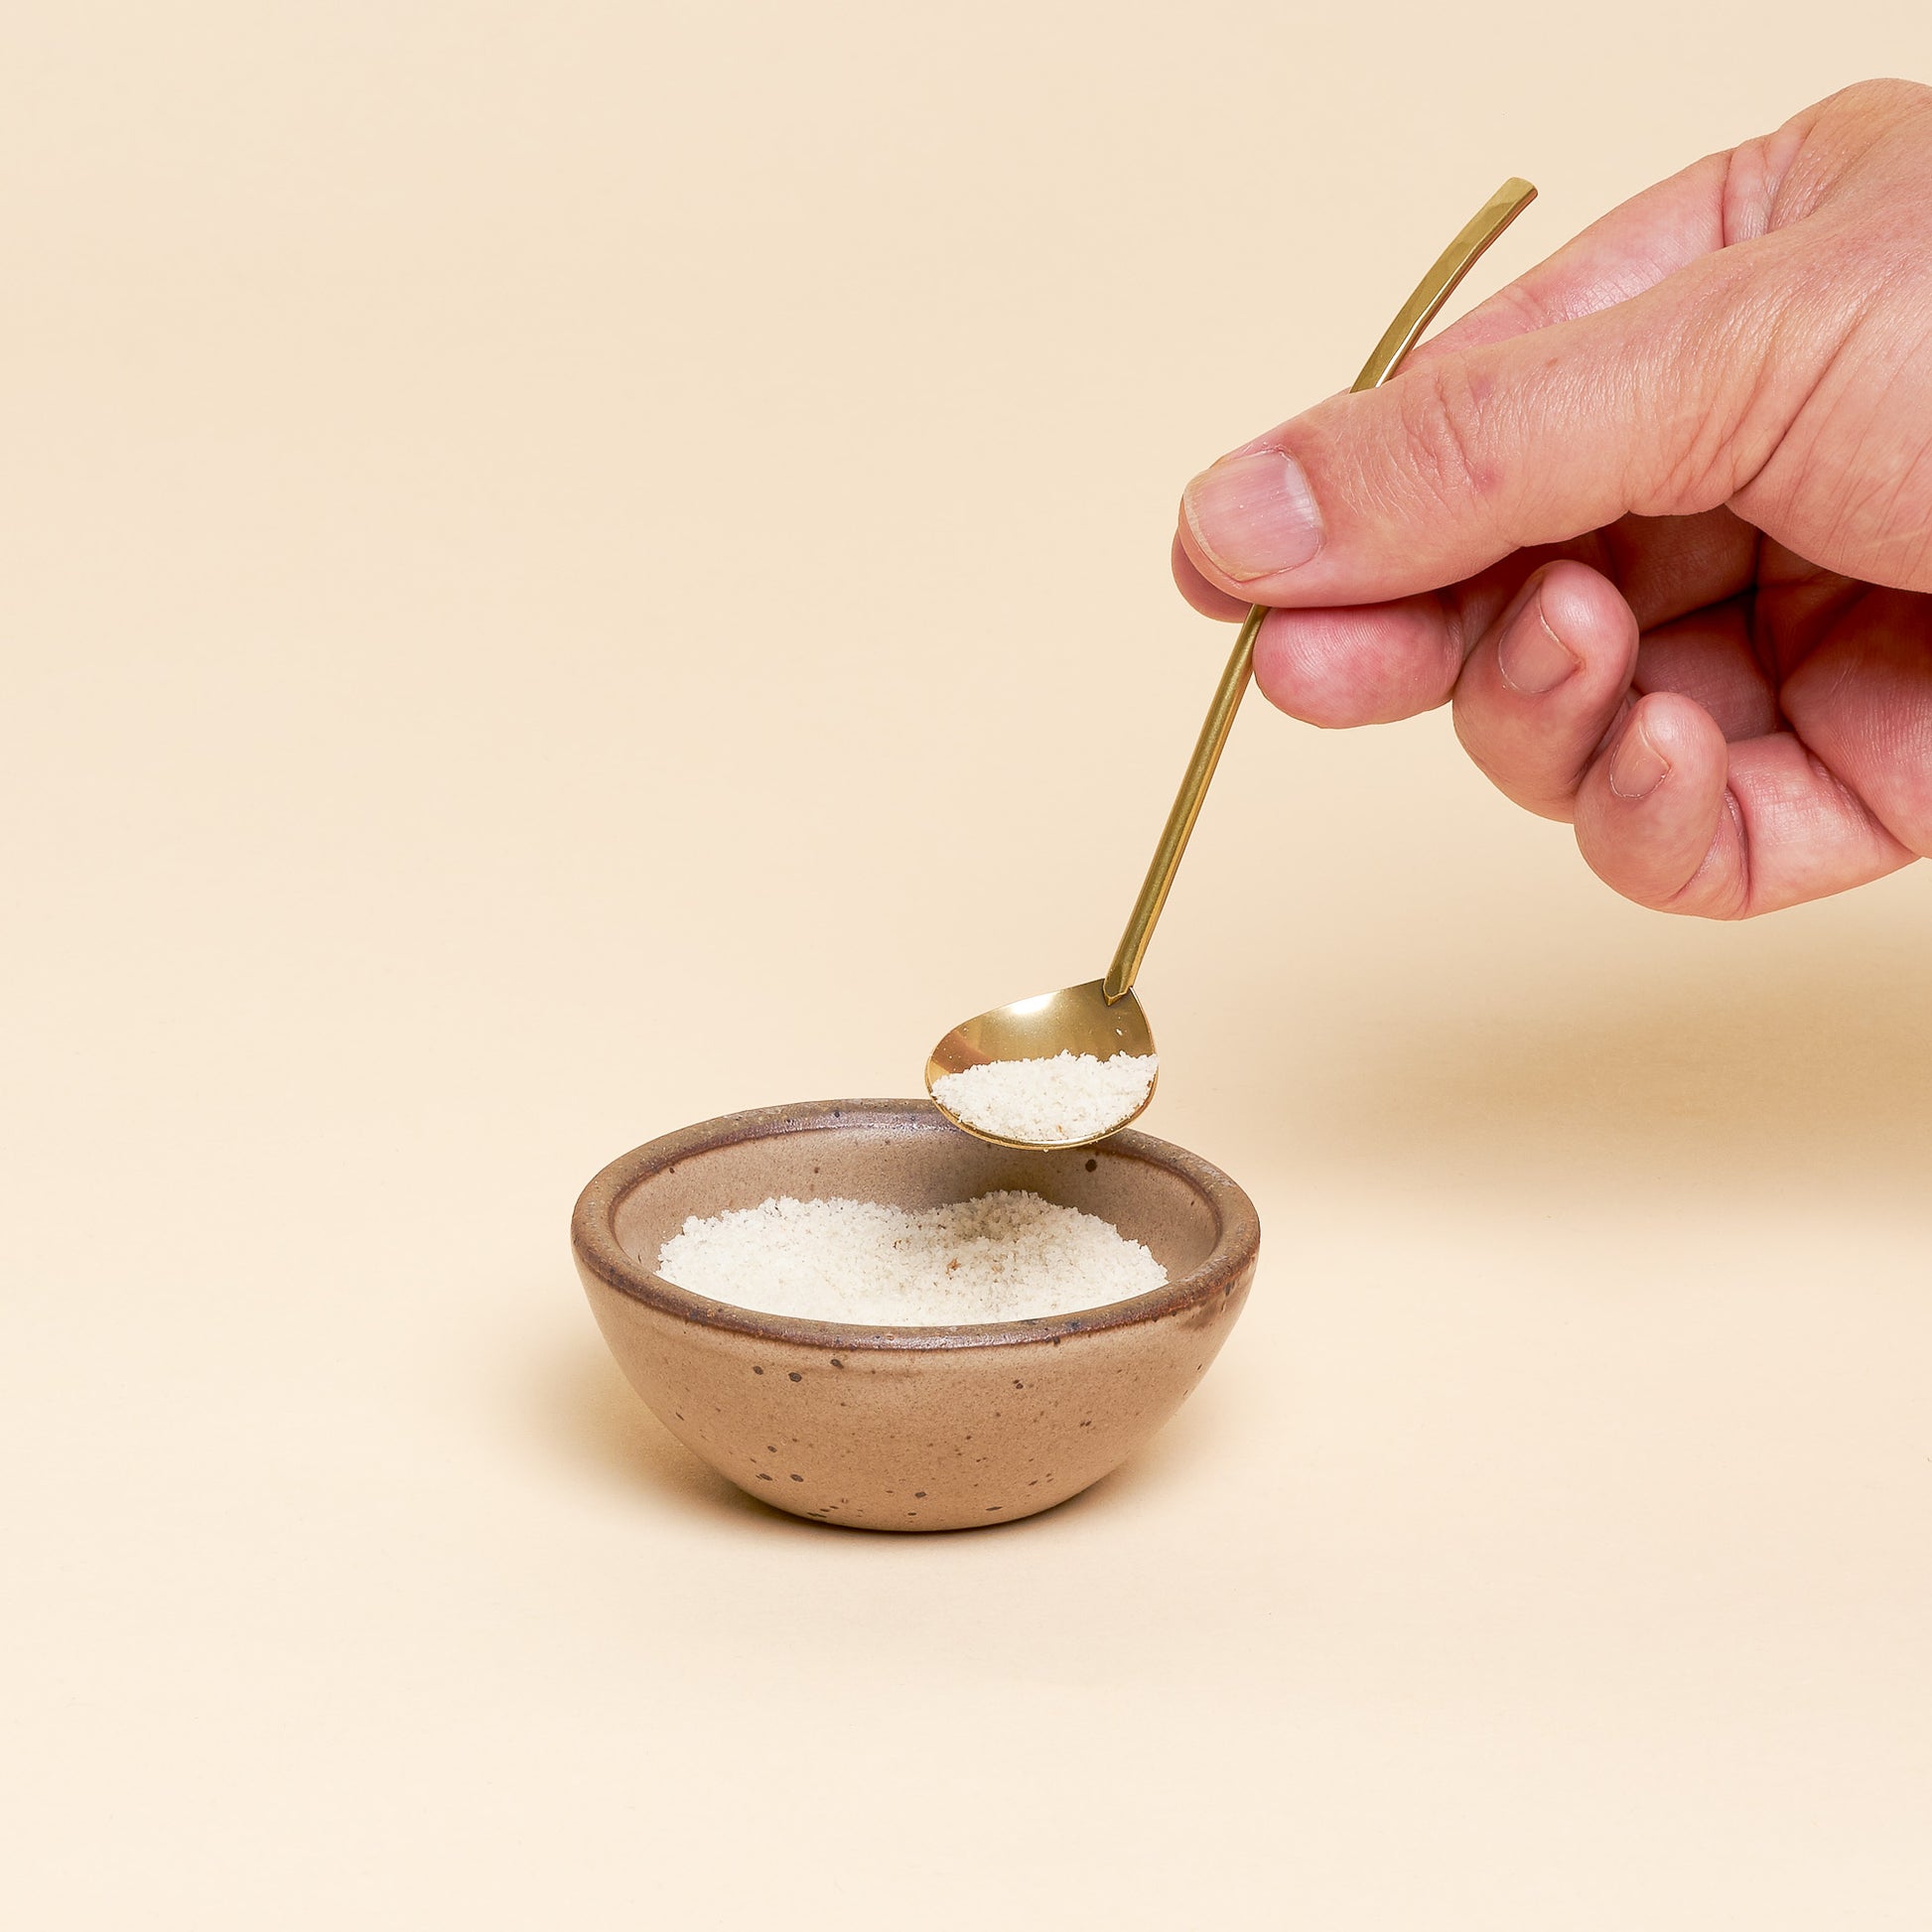 A hand holds a miniature ladle over an East Fork Bitty Bowl with a pinch resting in its spoon.